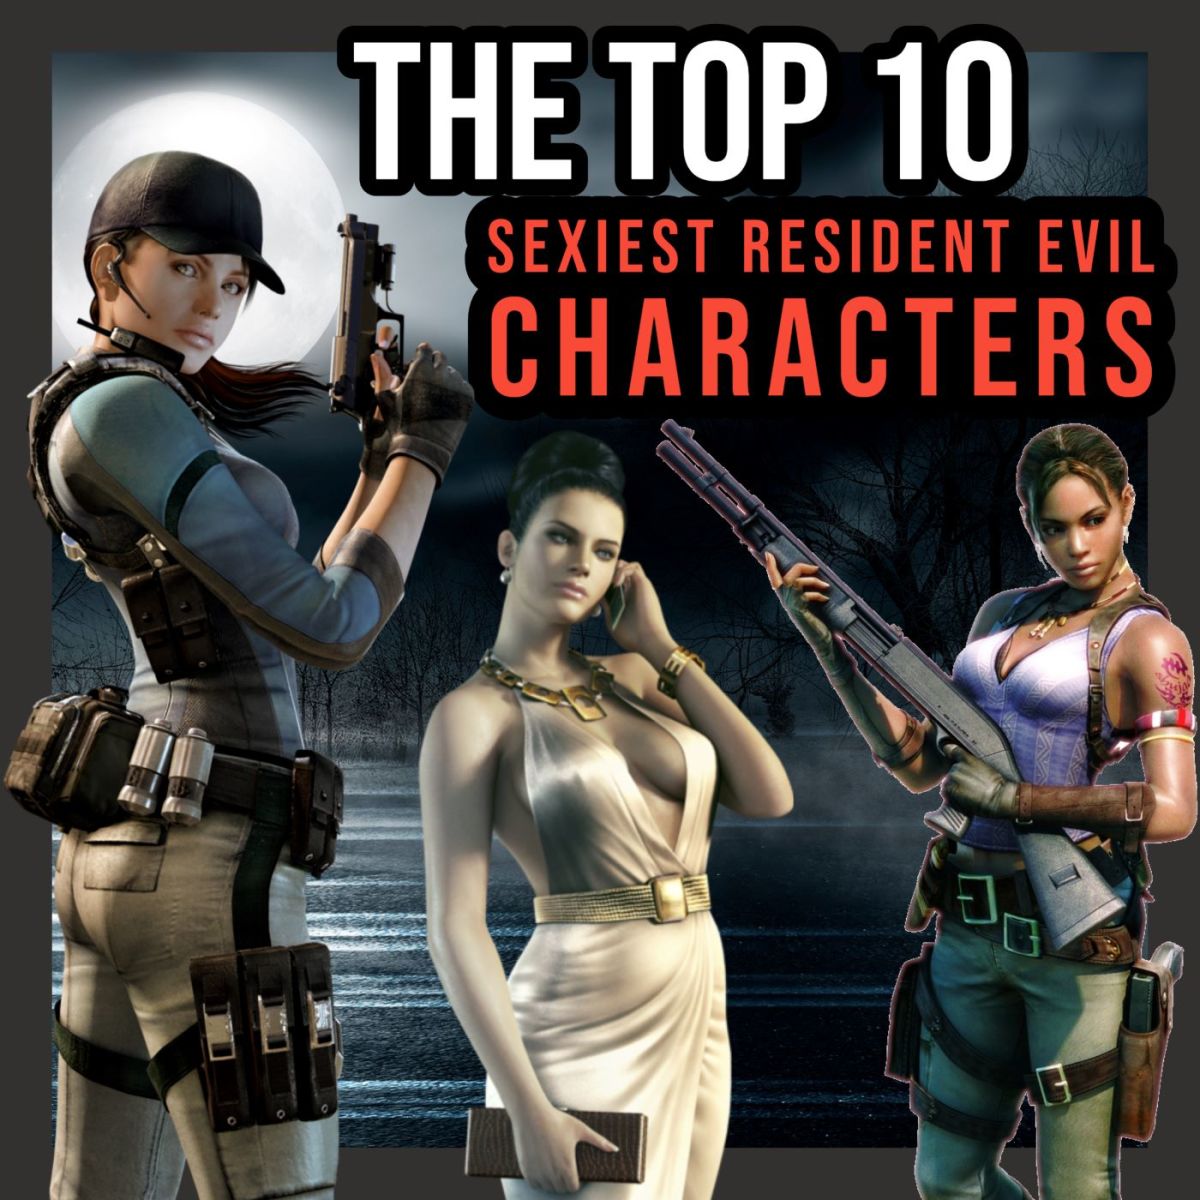 The Top 10 Sexiest Resident Evil Characters